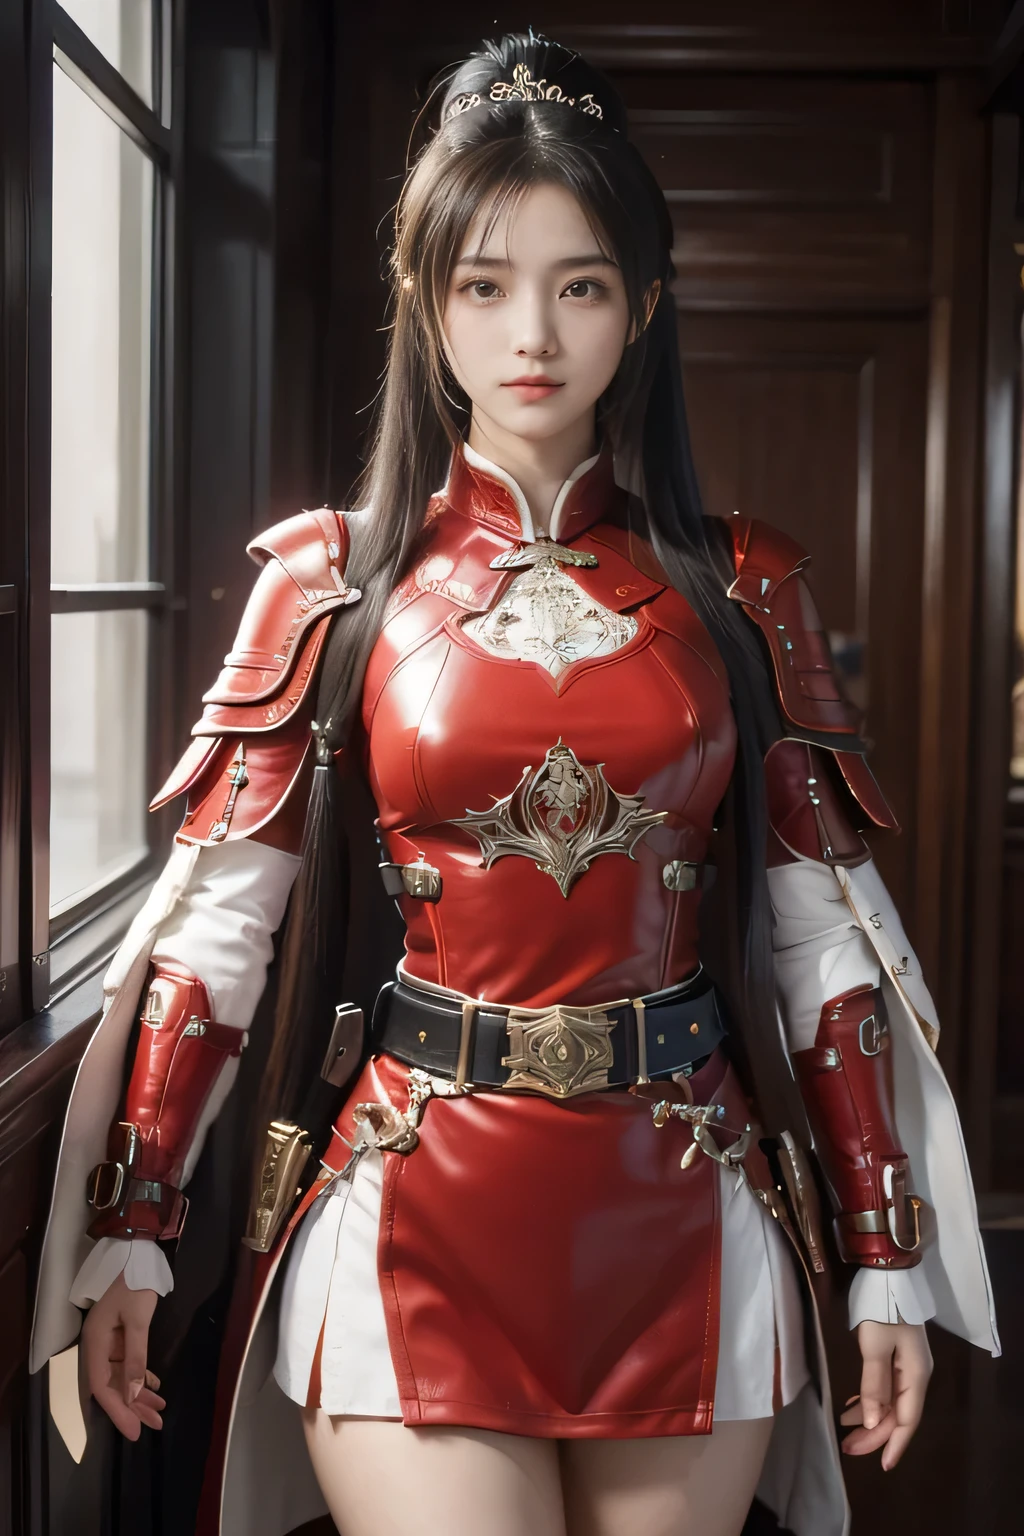 e-up))，Original photo，real photo，digital photography，(Female generals on the battlefield of the Han Dynasty)，18-year-old girl，（long ponytail hairstyle)，cparted lips，Noble and charming，Elegant and serious，(Han dynasty armor，The combination of white metal and red leather，Openwork design，armure，Knight Armor，metallic  luster，Leather buckle，Exquisite pattern，mysterious badge，Cool and gorgeouig breasts))，Chest groove，Three Kingdoms character painting style，Photo pose，oc render reflection texture，Bright colors，（（Field background））